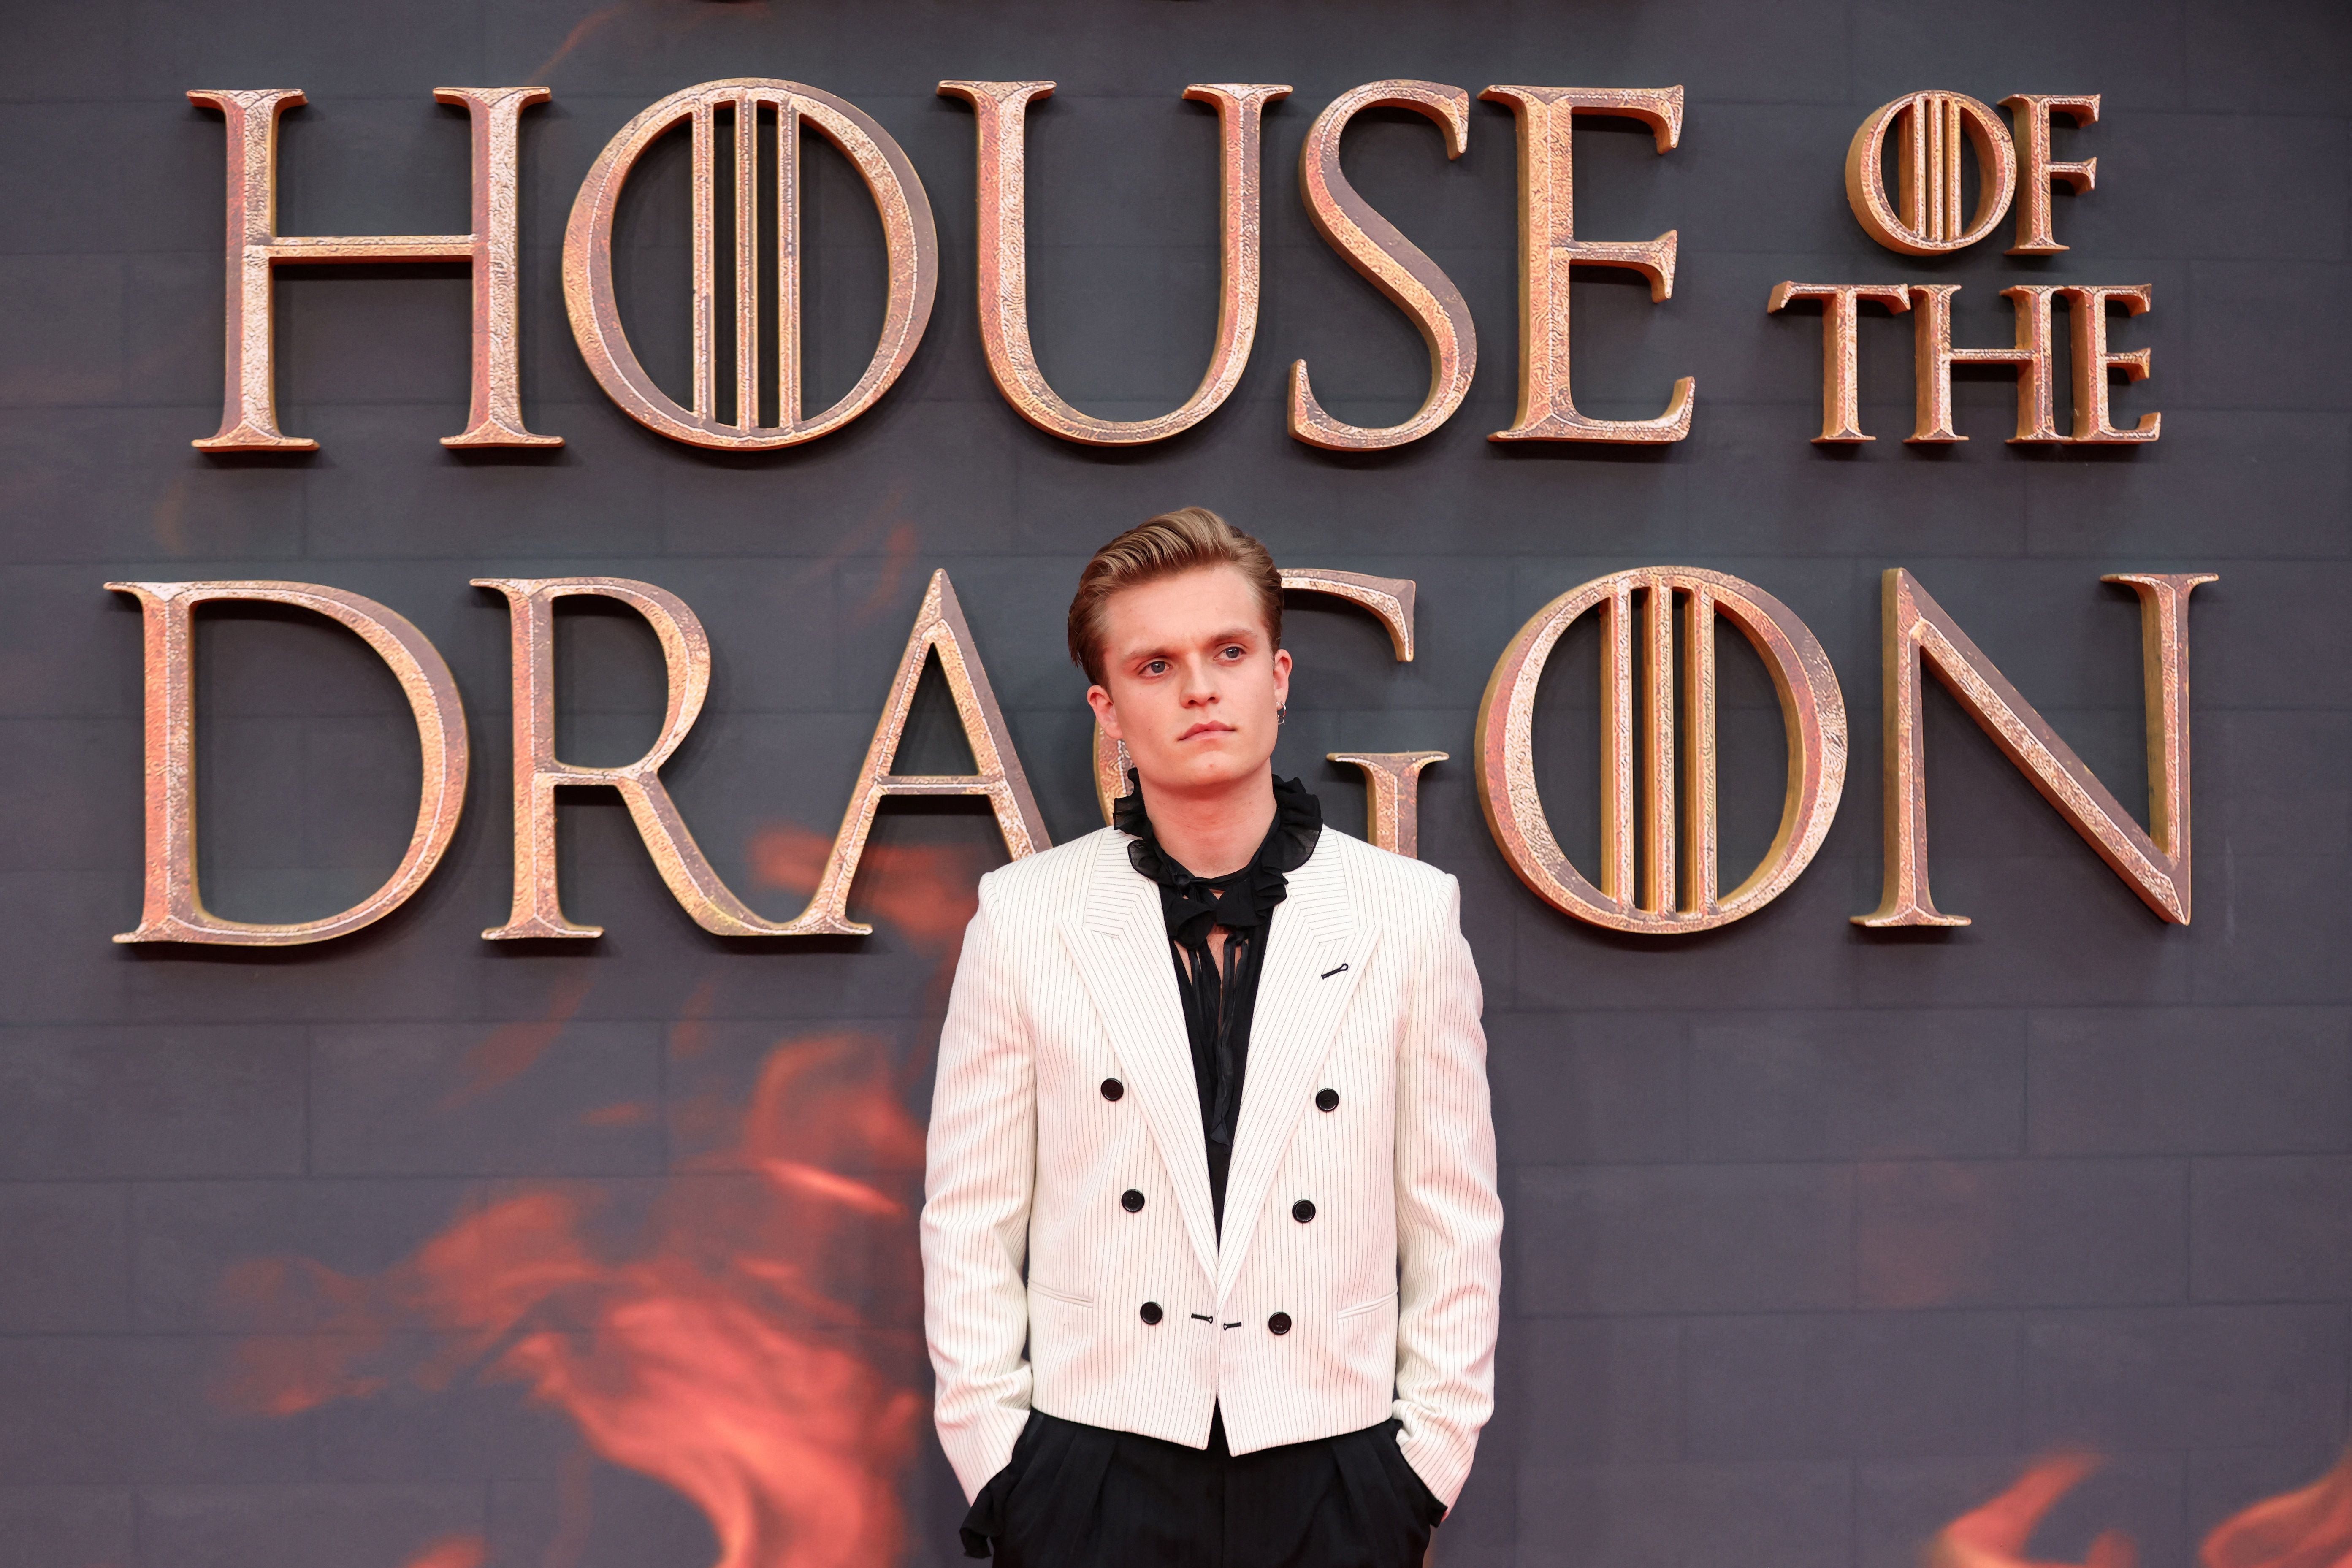 British actor Tom Glynn-Carney poses on the red carpet upon arrival to attend the HBO original drama series "House of the Dragon" premiere at Leicester Square Gardens, in London, on August 15, 2022. | Source: Getty Images